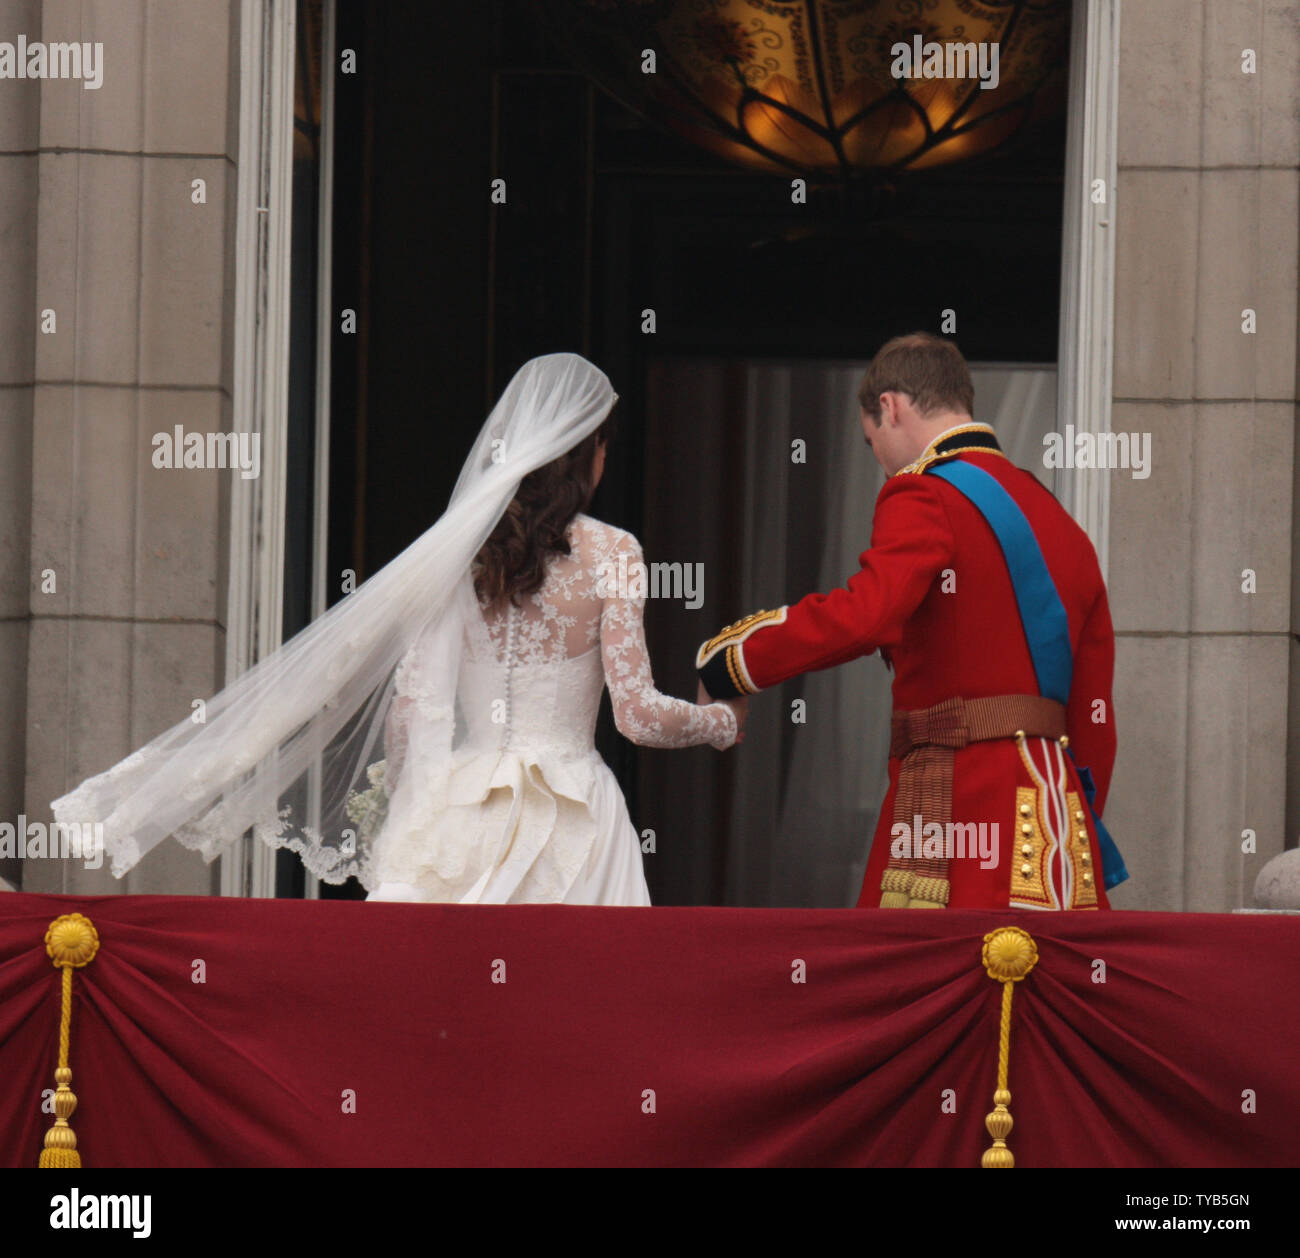 Prince William and Princess Catherine turn to go inside Buckingham Palace after their wedding at Westminster Abbey on April 29, 2011 The Royal couple will now be known as the Duke and Duchess of Cambridge.    UPI /HugoPhilpott Stock Photo